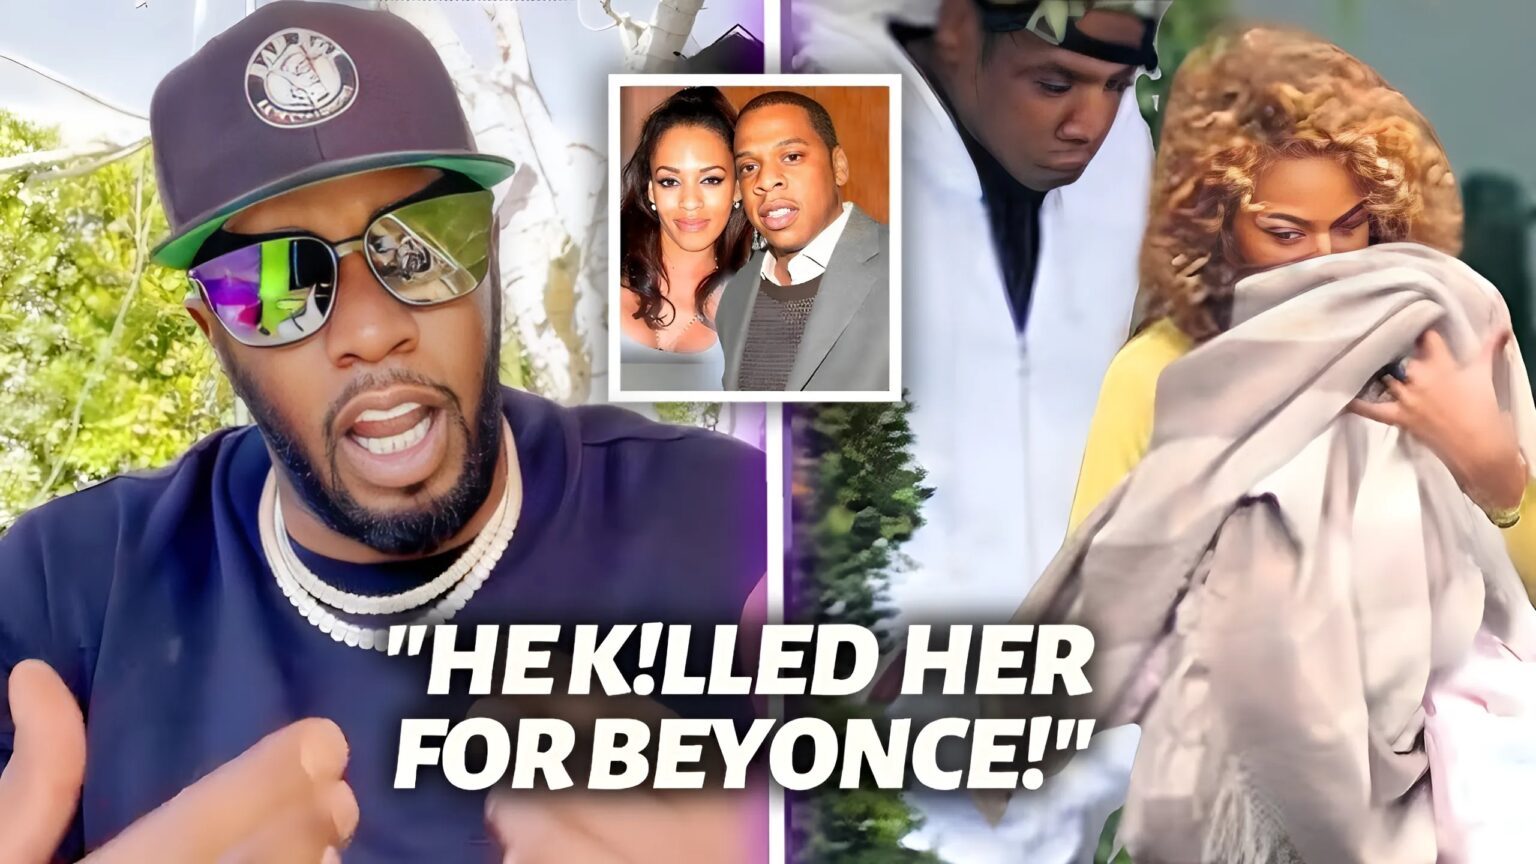 OMG About to get real!! Diddy Brings Evidence Of How Jay Z Unalived His Mis:tress To Protect Beyonce.